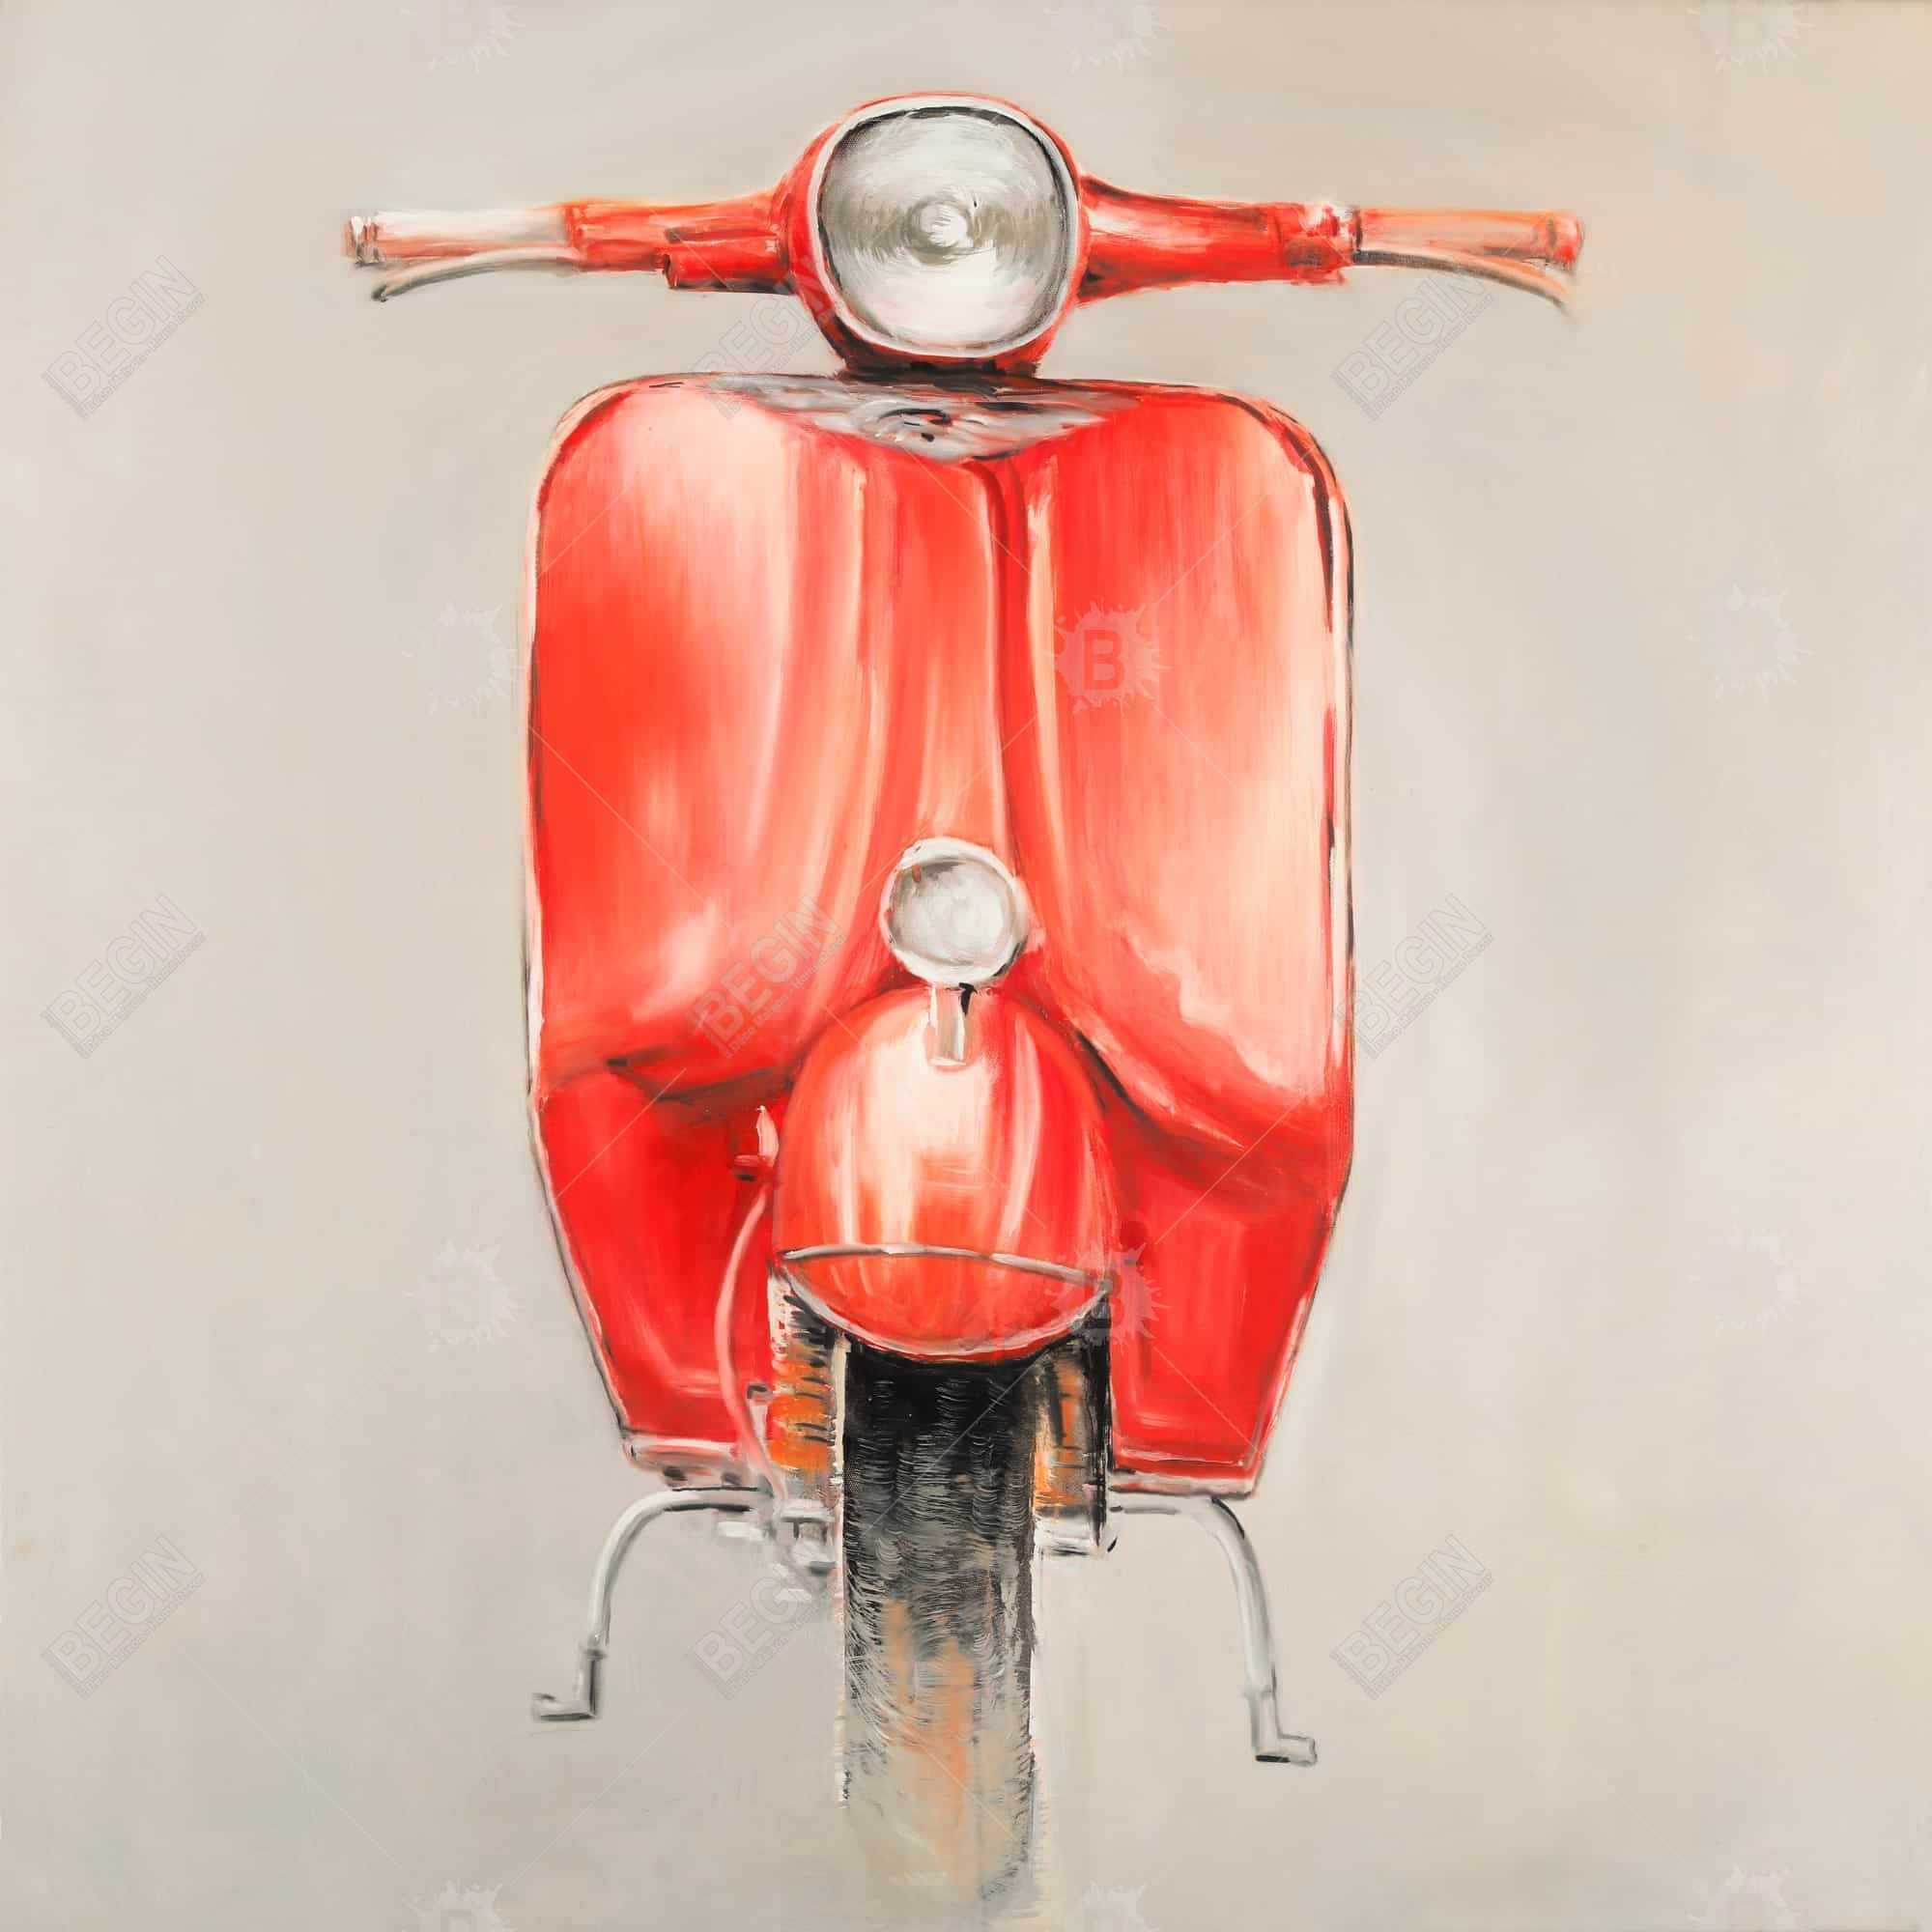 Small red moped